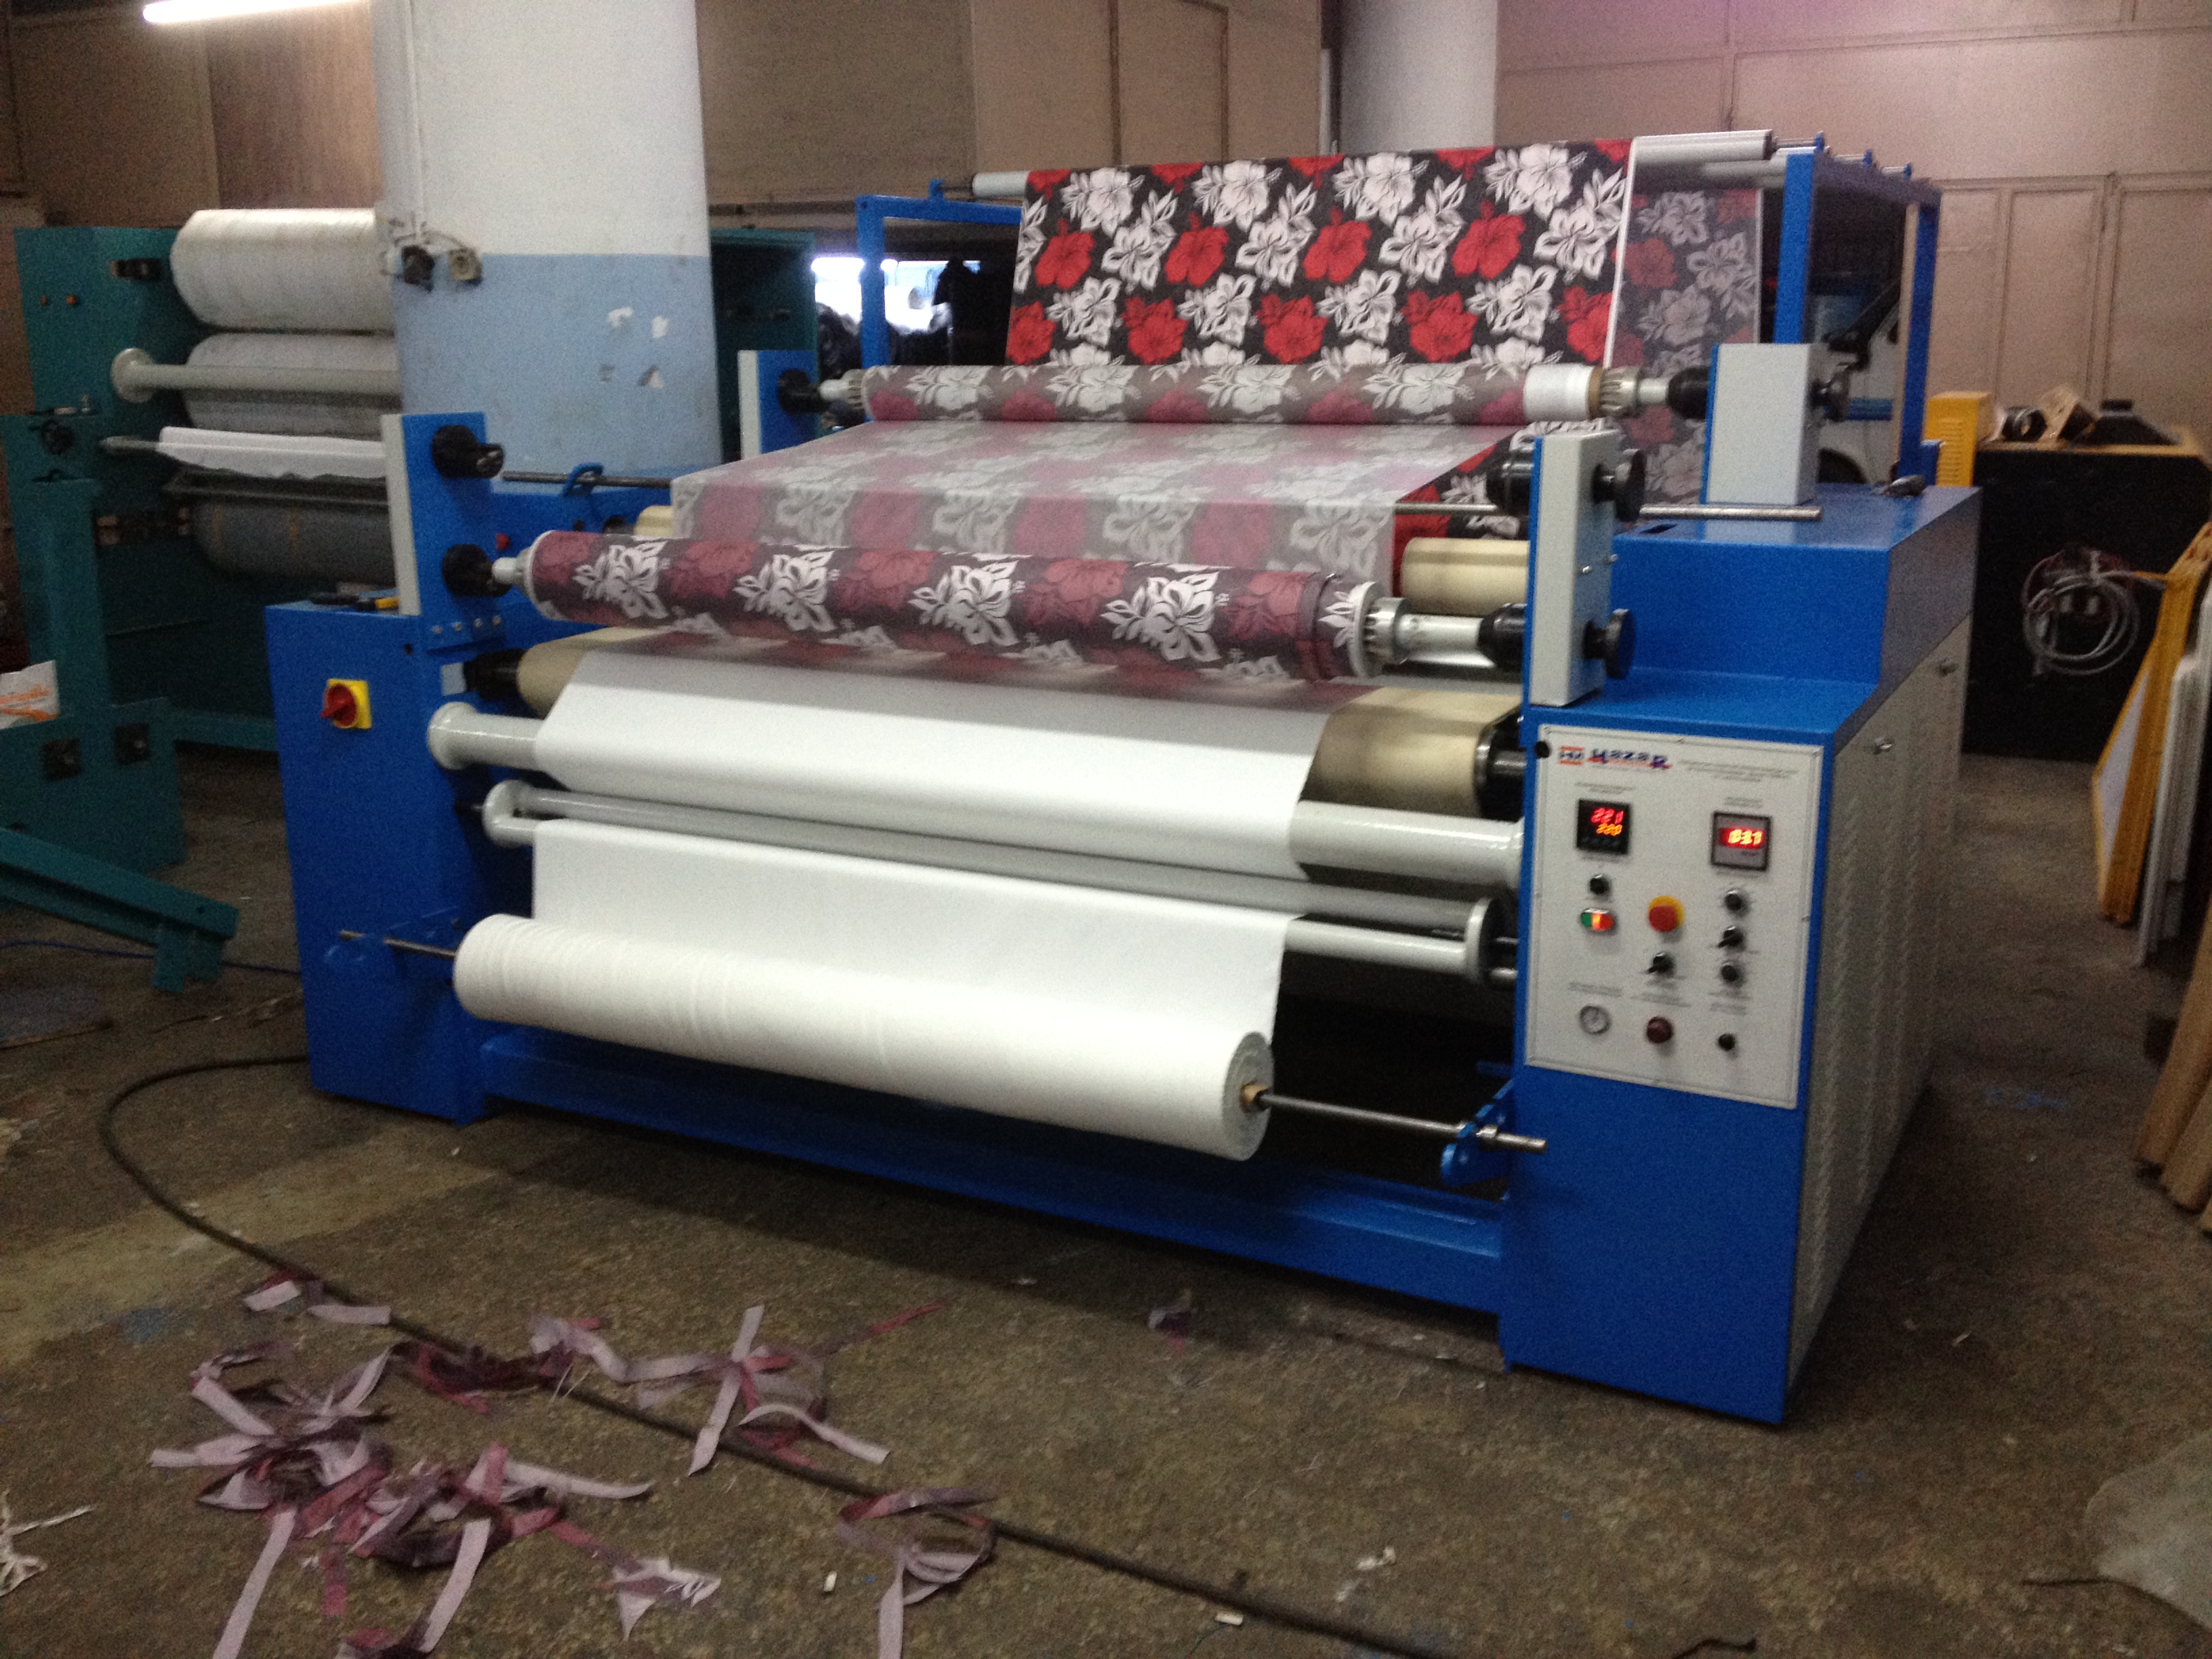 What is Sublimation Transfer Print